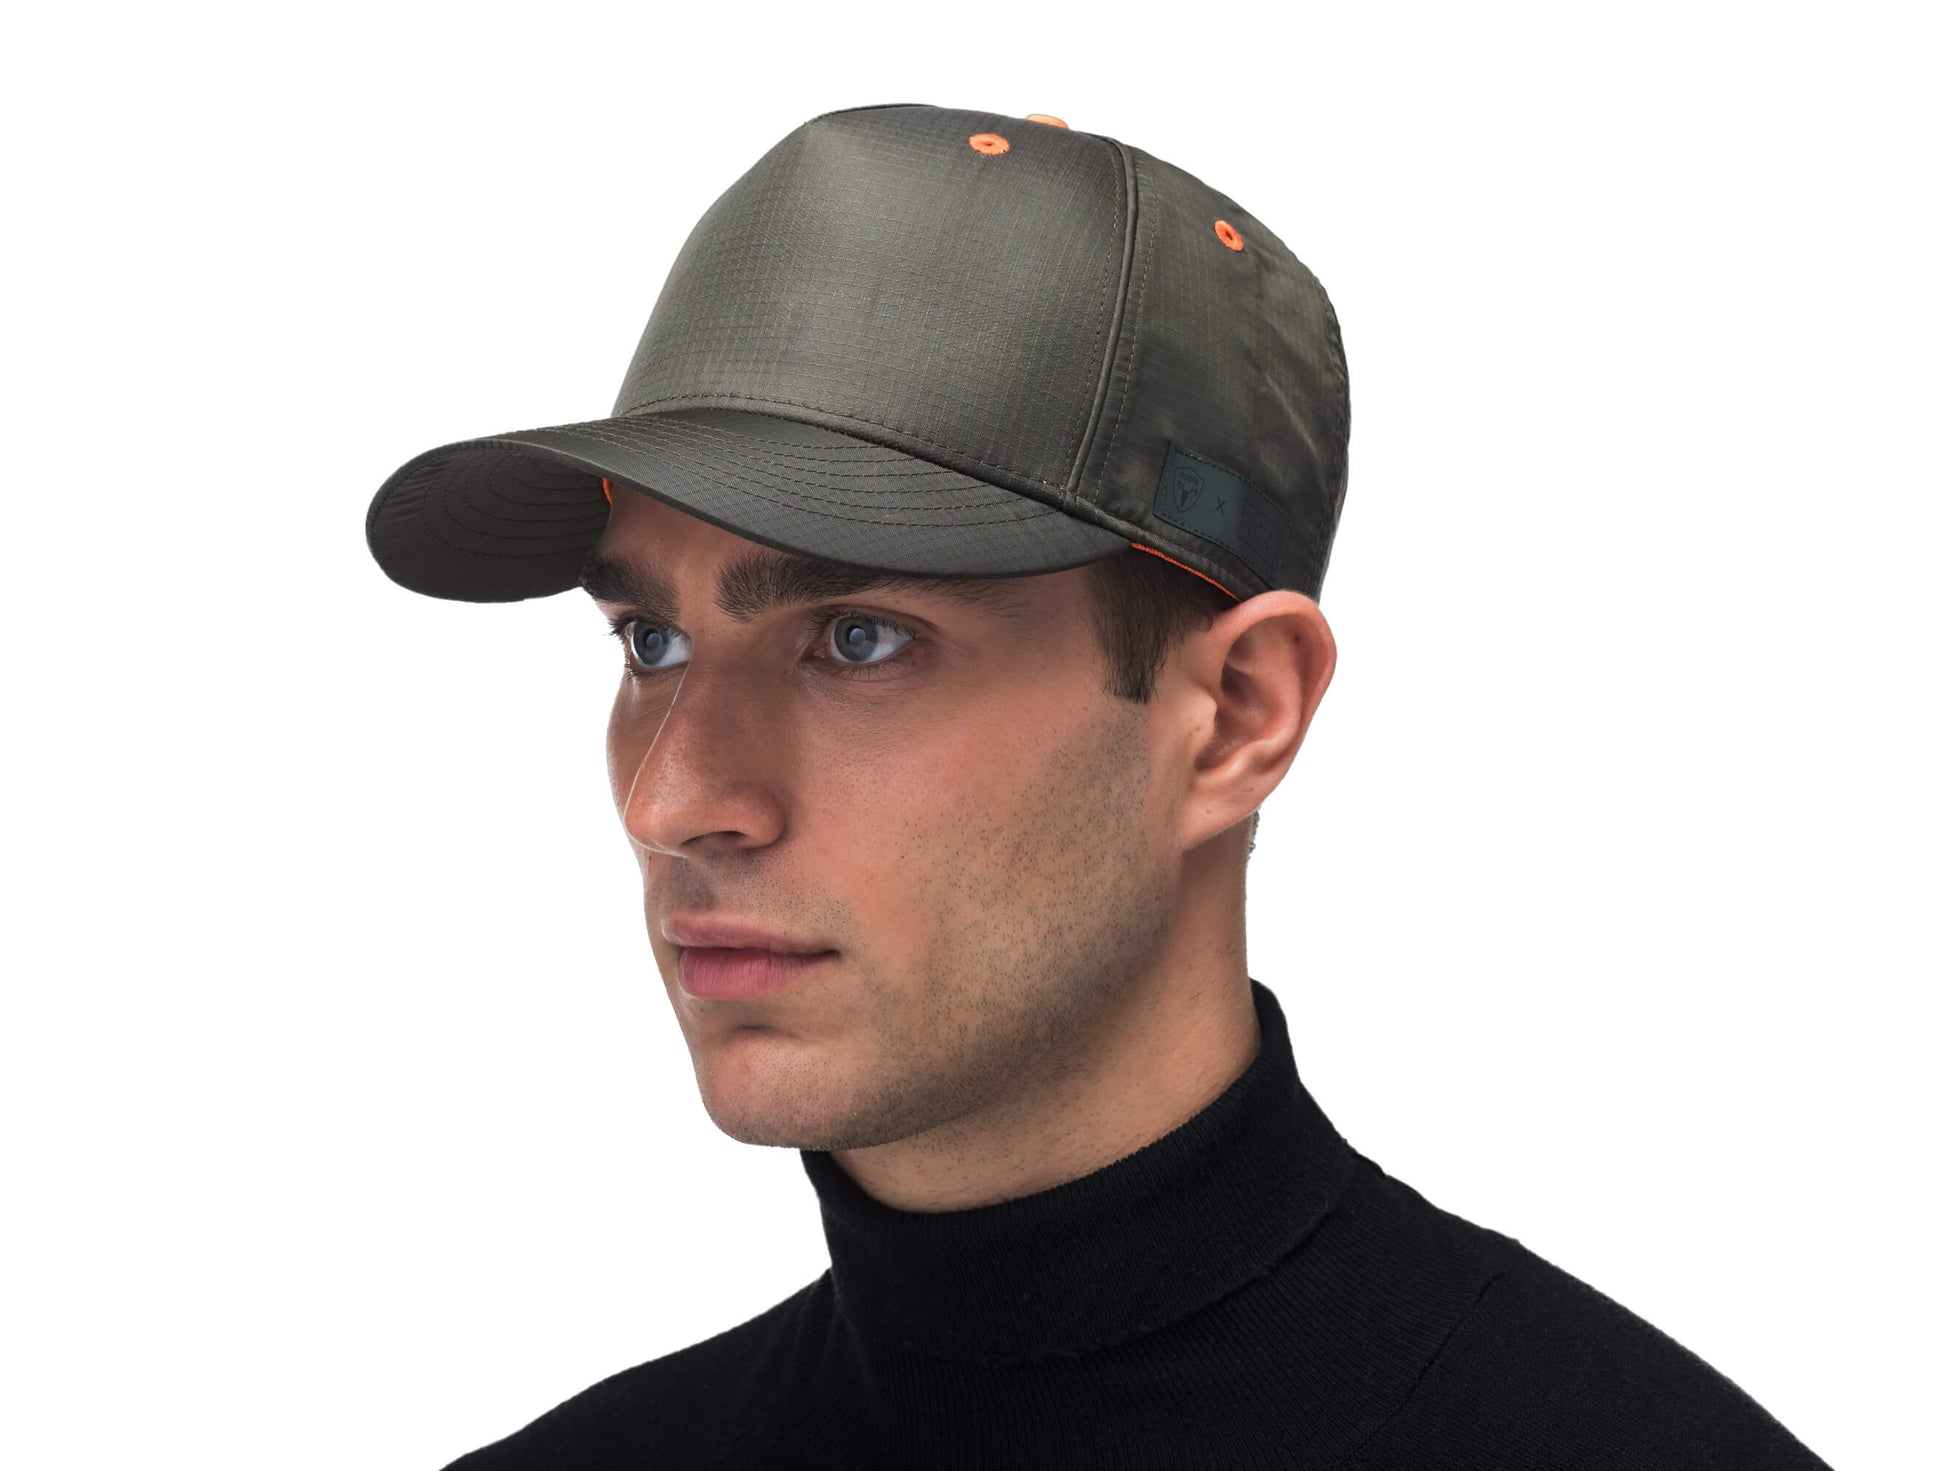 Unisex 5 panel baseball cap with adjustable back and contrast colour detailing in Dusty Olive